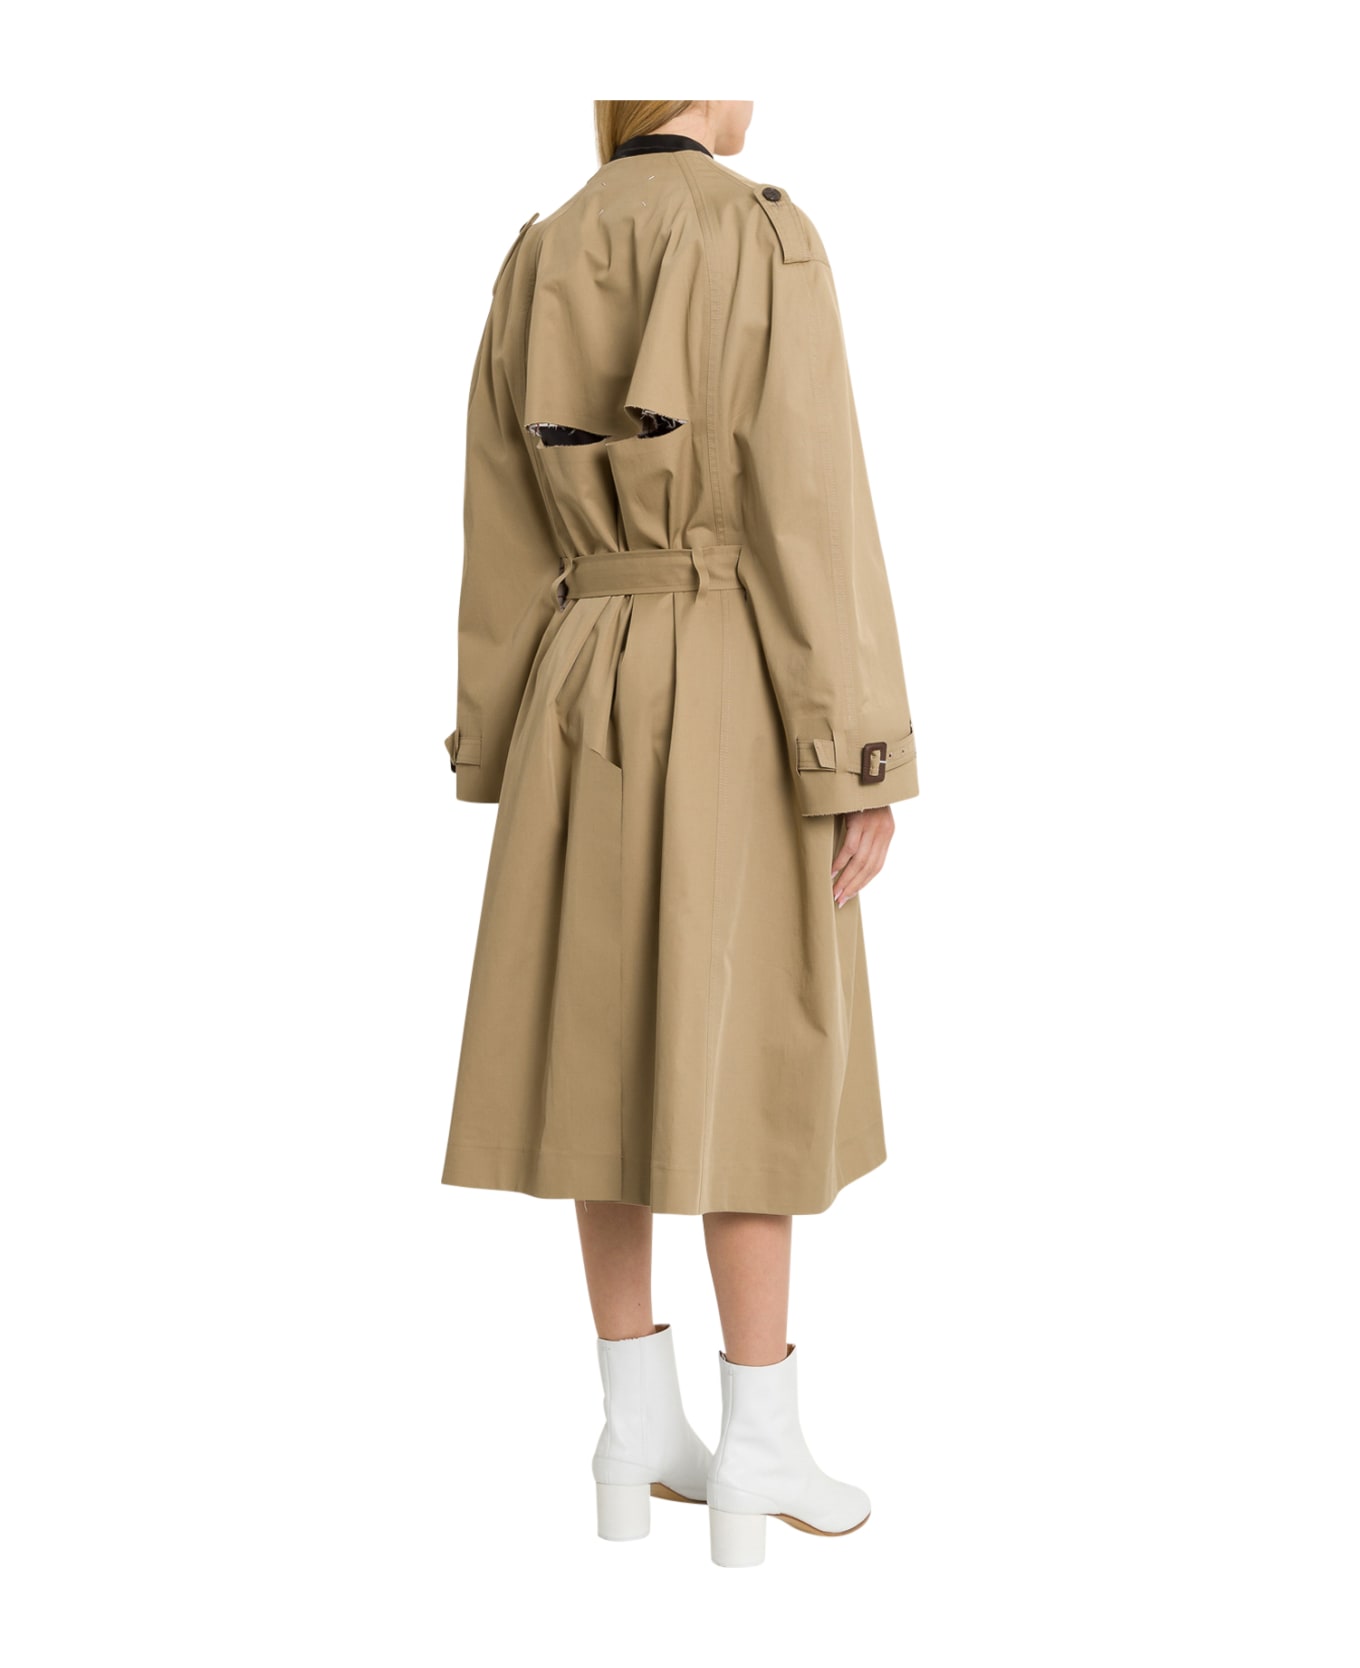 Maison Margiela Oversized Trench Coat With Cut-out Details | italist